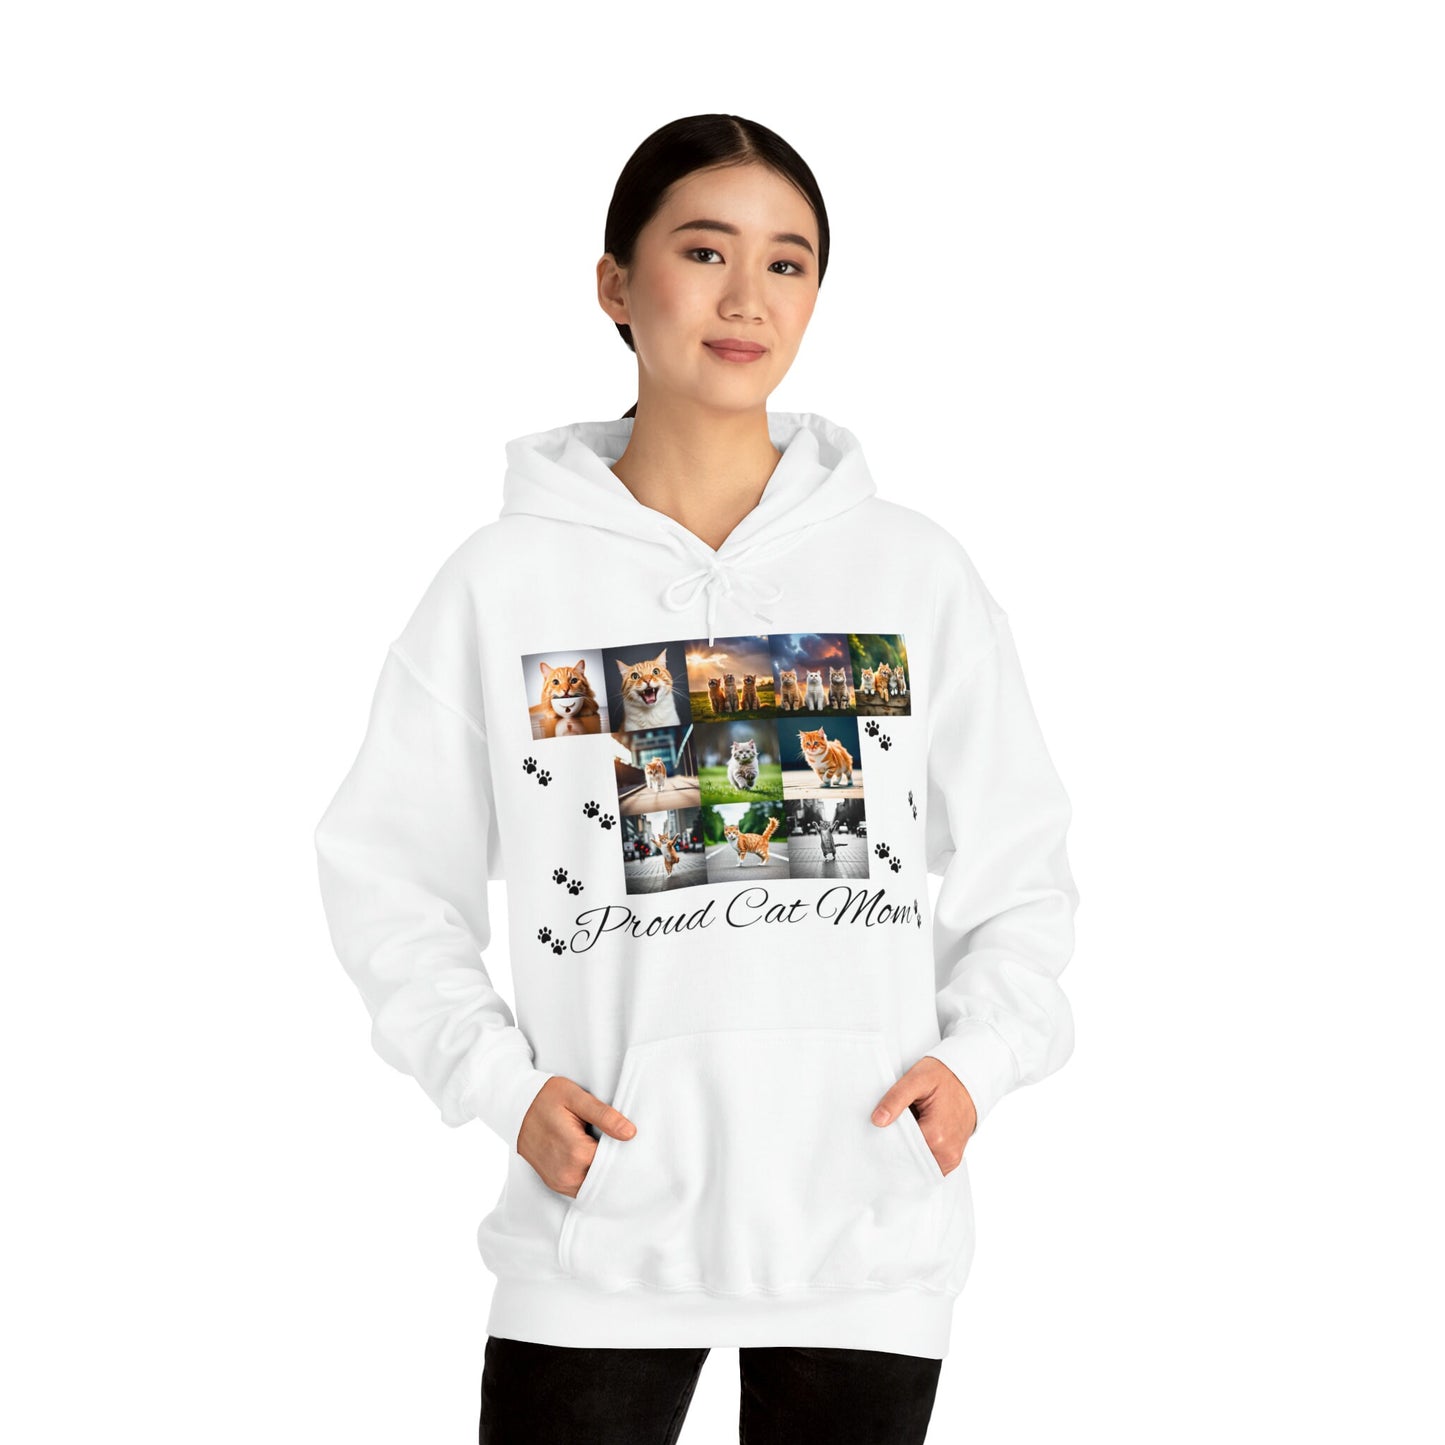 Proud Cat Mom Hoodie - Show Off Your Feline Love with Style!